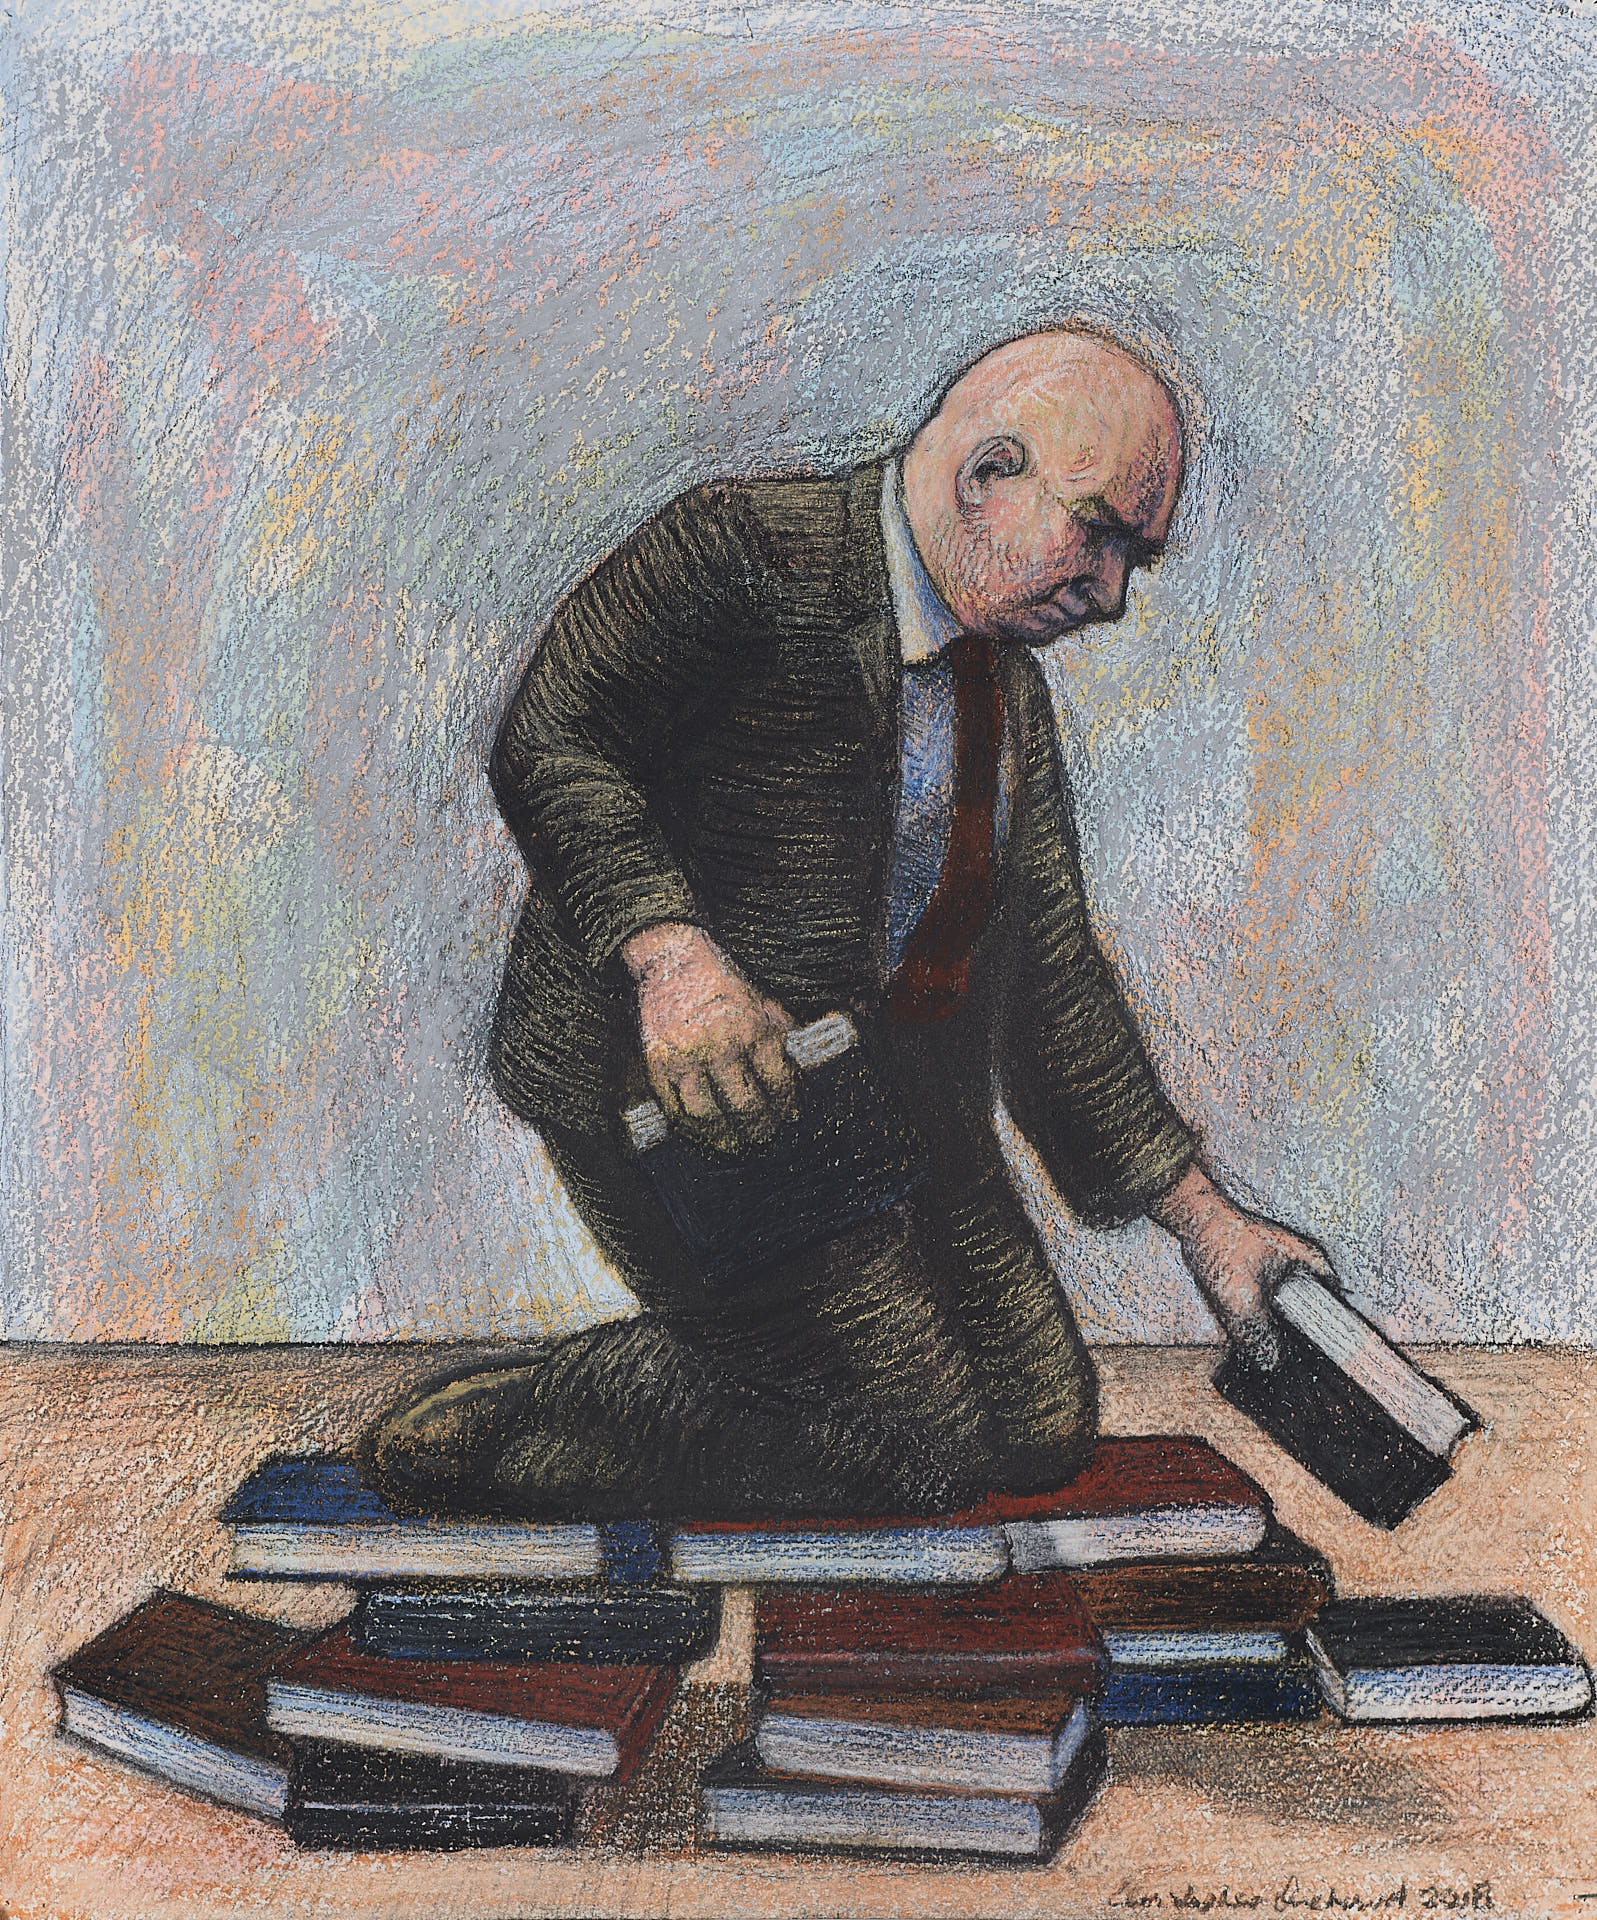 Christopher Orchard 'The Cataloguer' acrylic, charcoal and pastel on paper 33 x 28cm $1,900